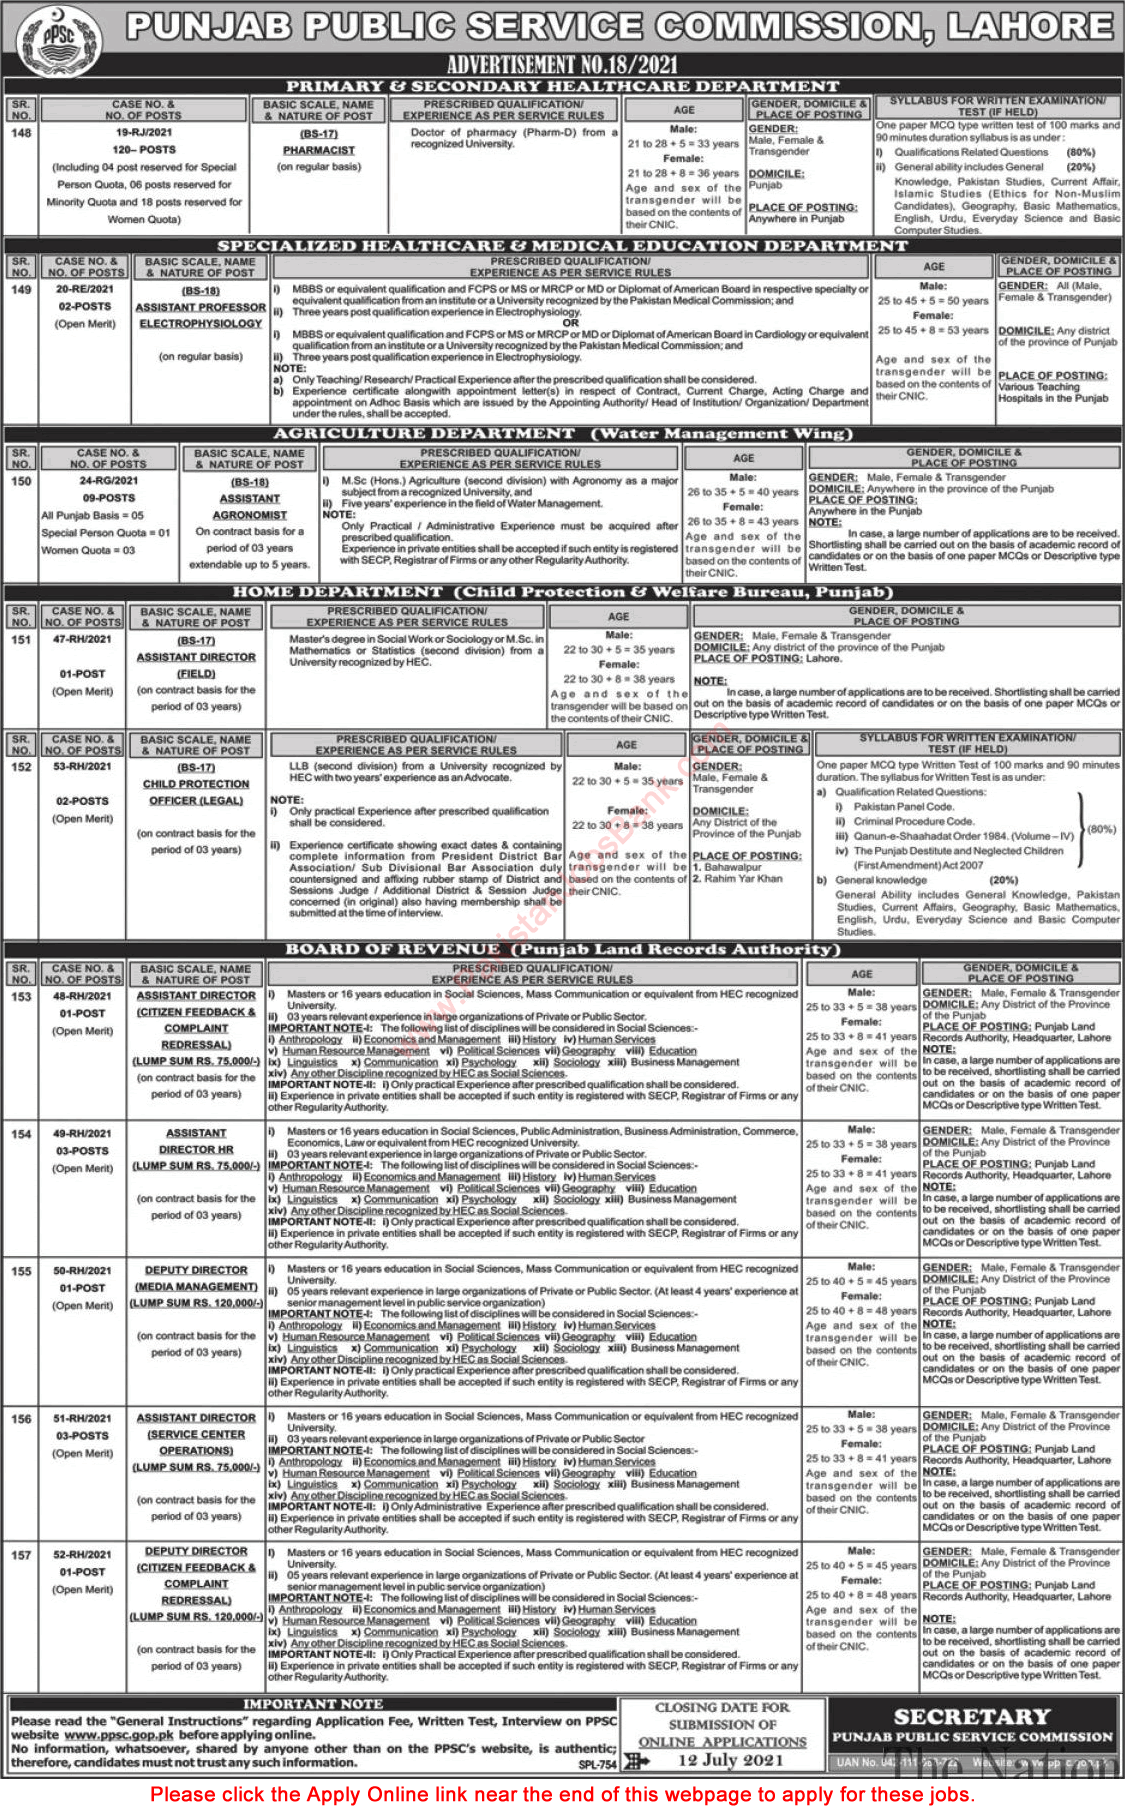 PPSC Jobs June 2021 July Apply Online Consolidated Advertisement No 18/2021 Latest